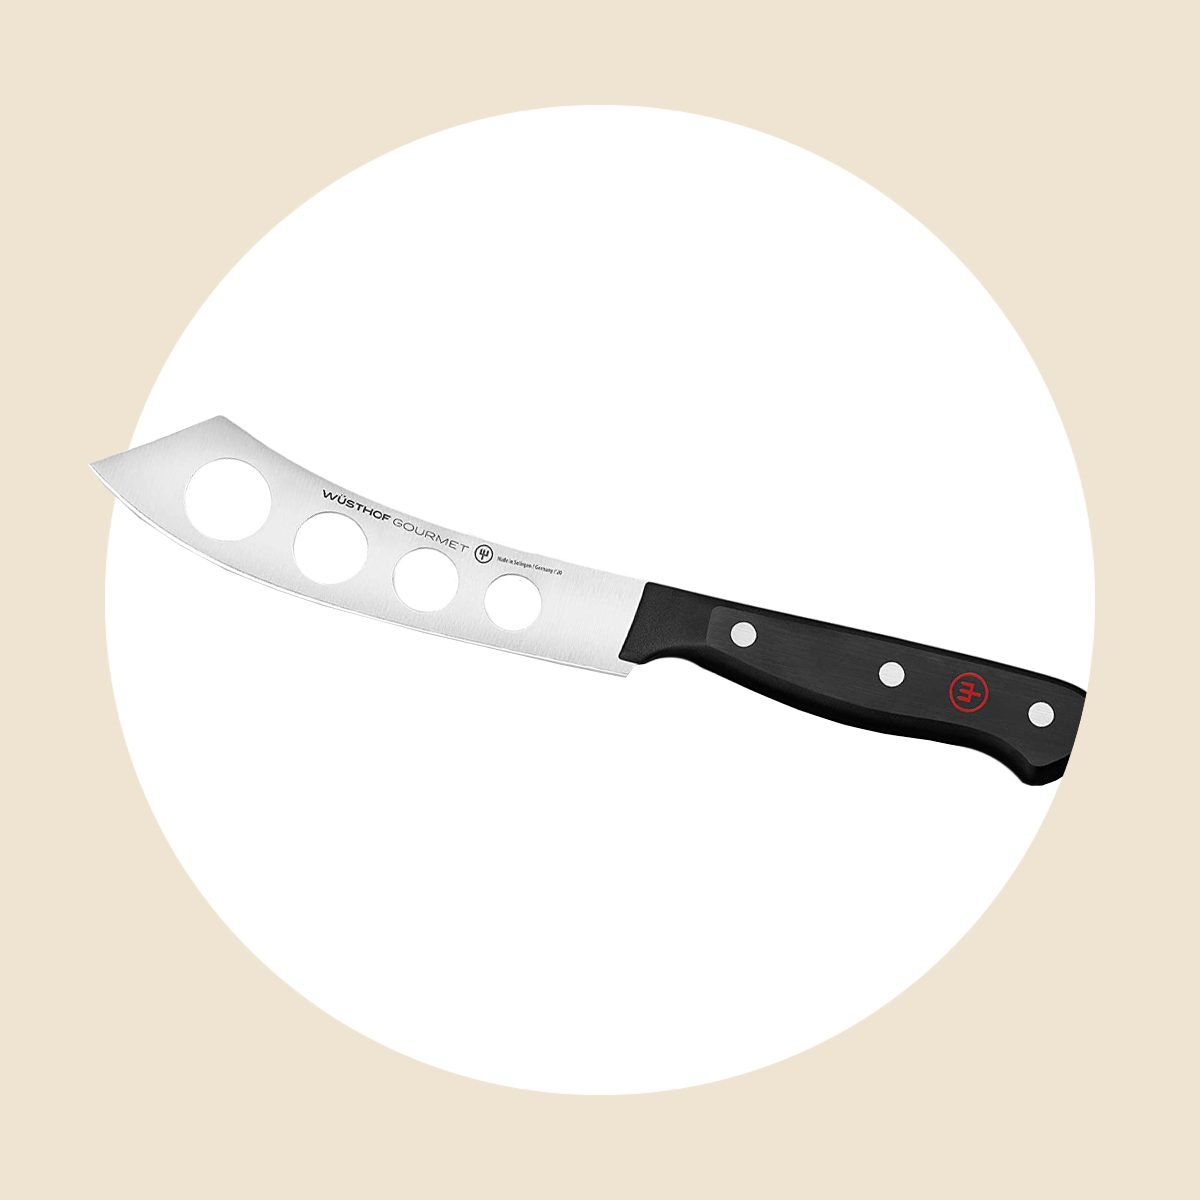 Kitchen Supply Wide Bladed Cheese Knife